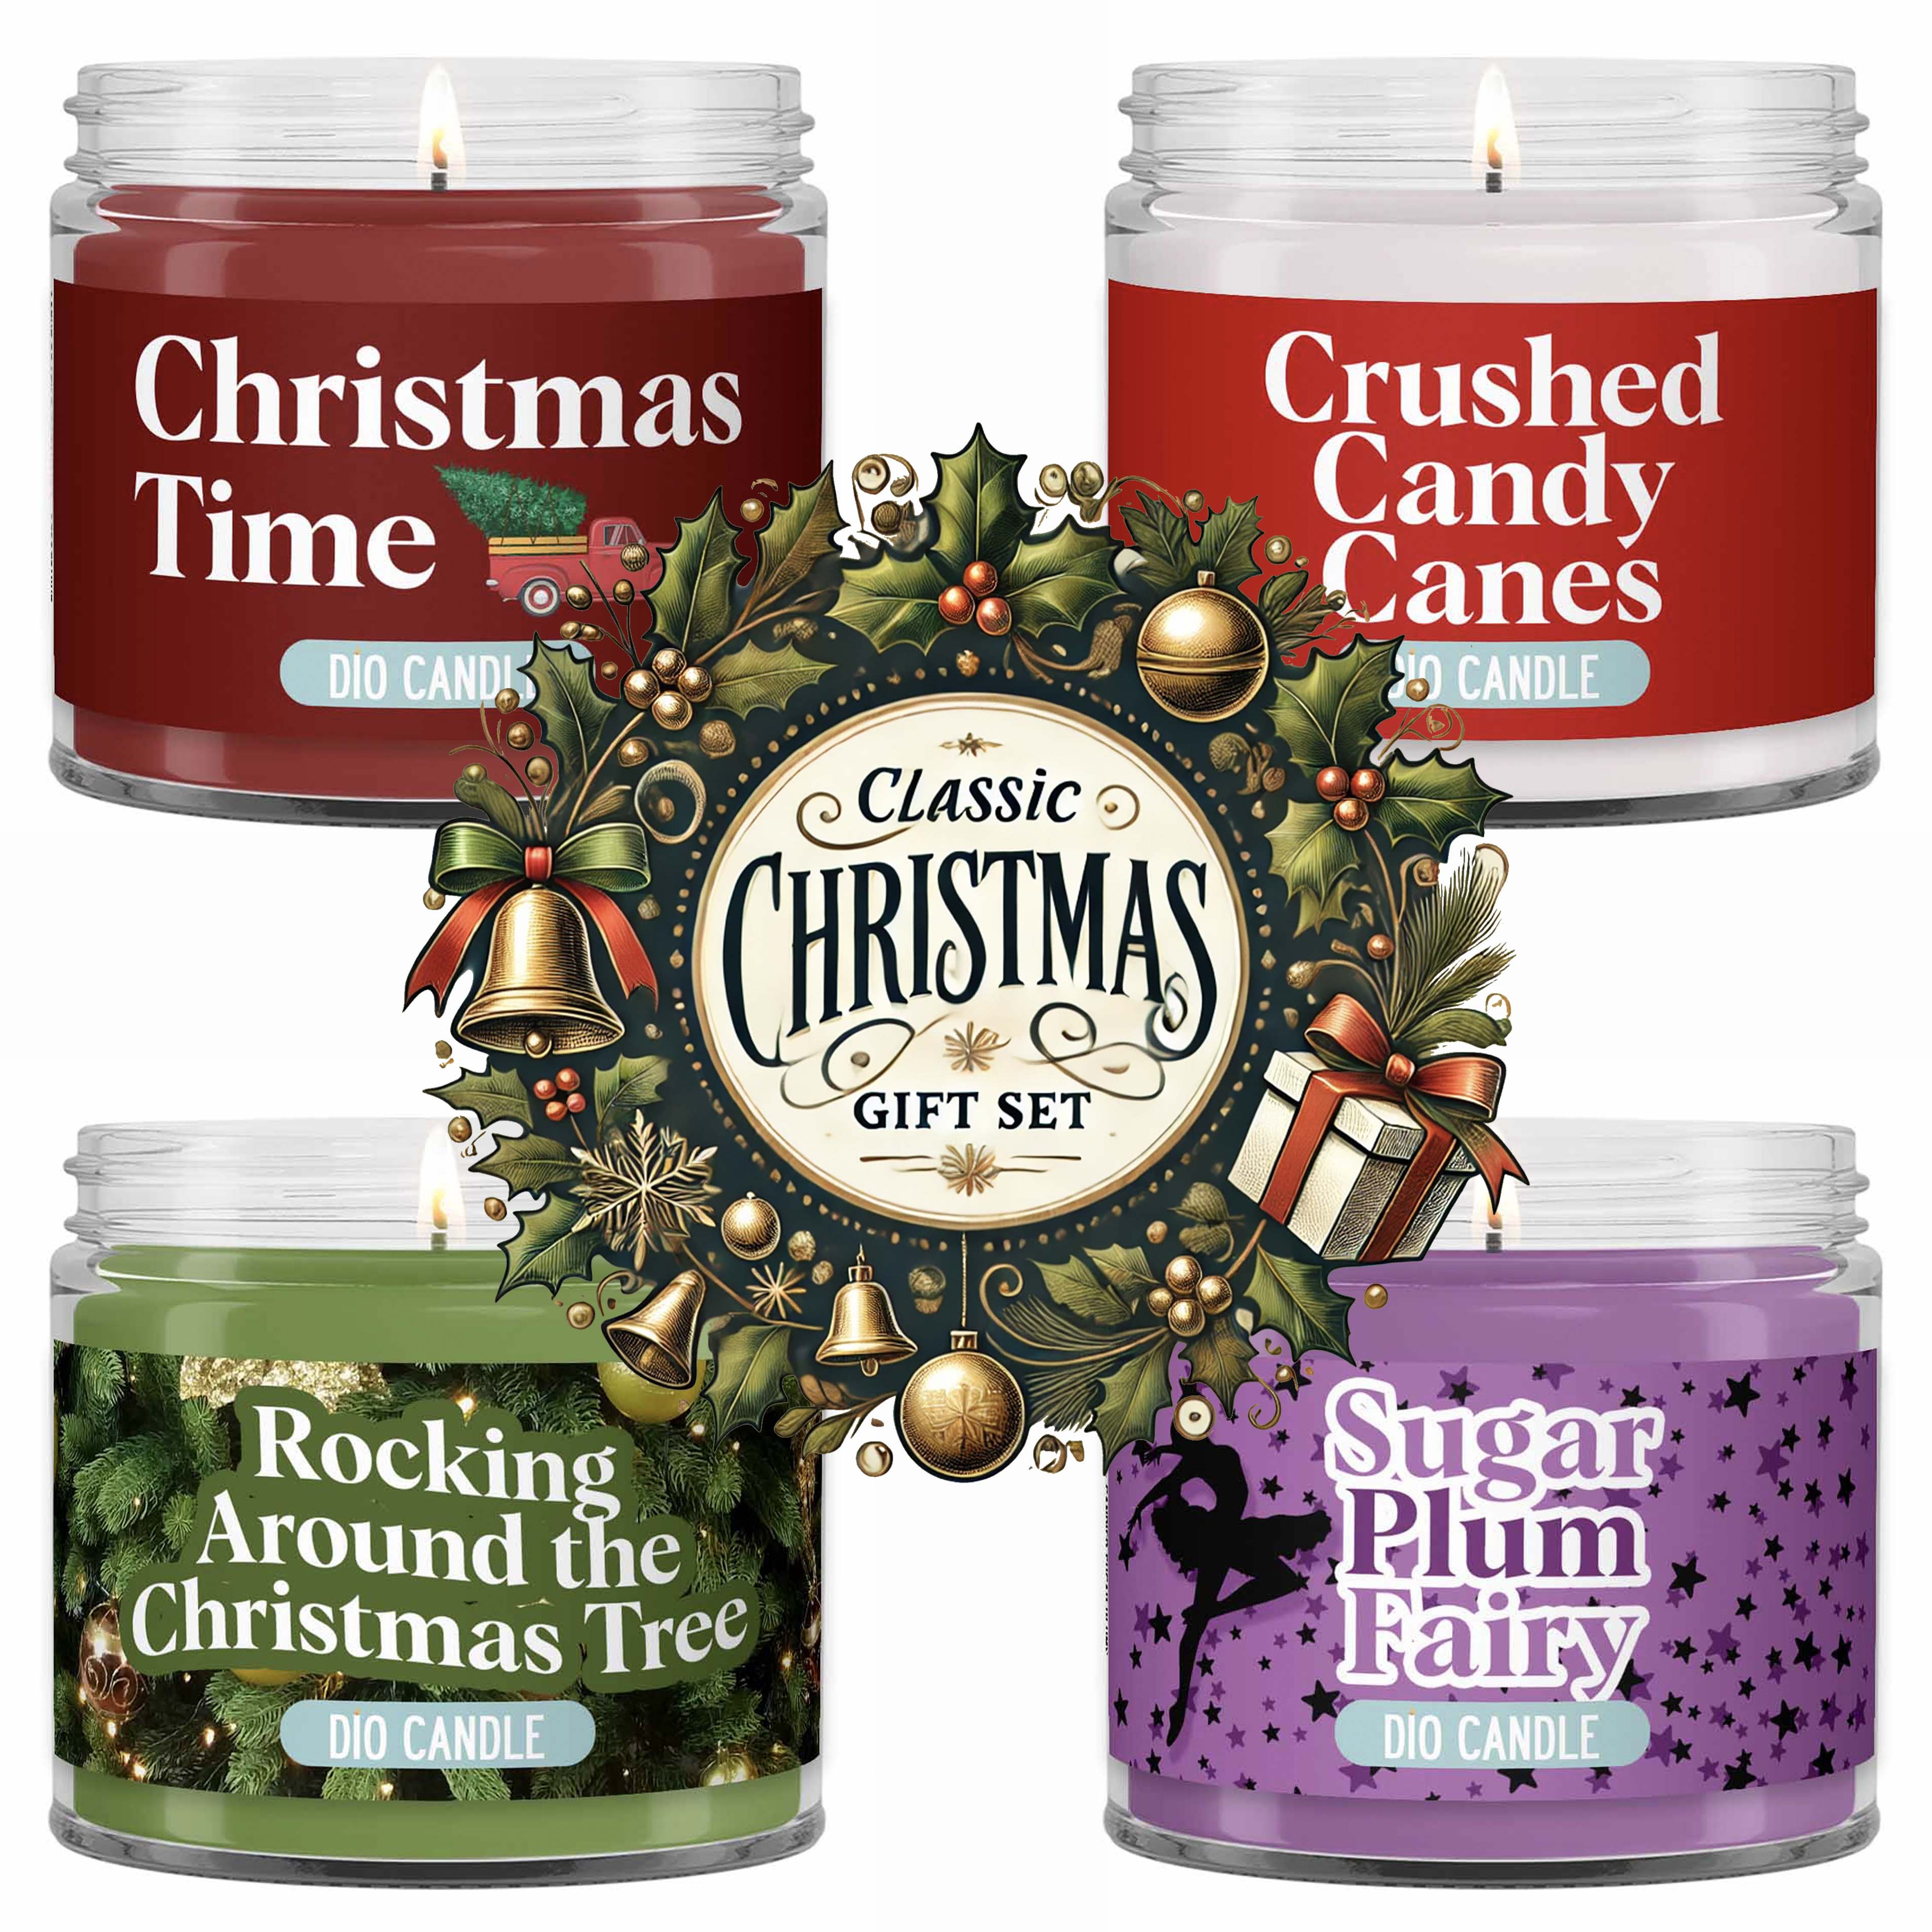 Classic Christmas 4 Candles Gift Set